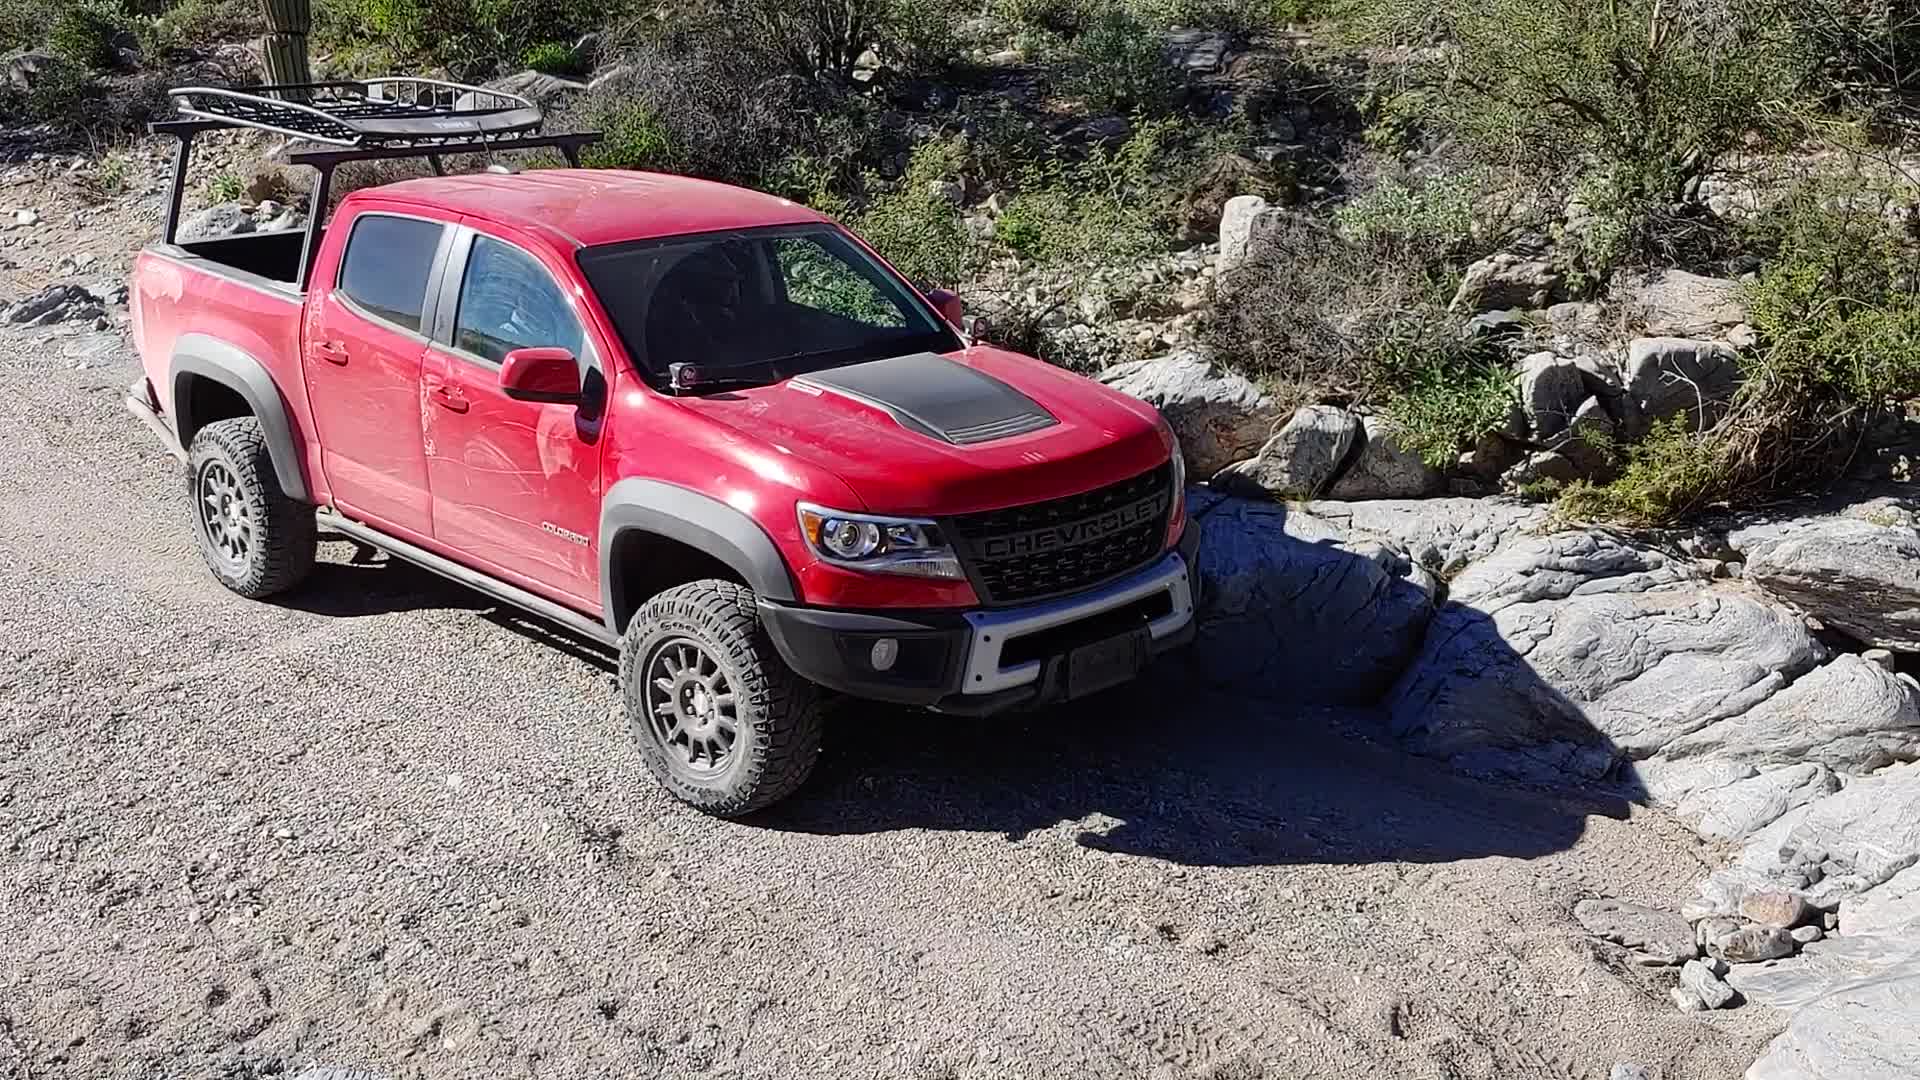 2019 Chevy Colorado ZR2 Bison Tray Bed Concept revealed by AEV